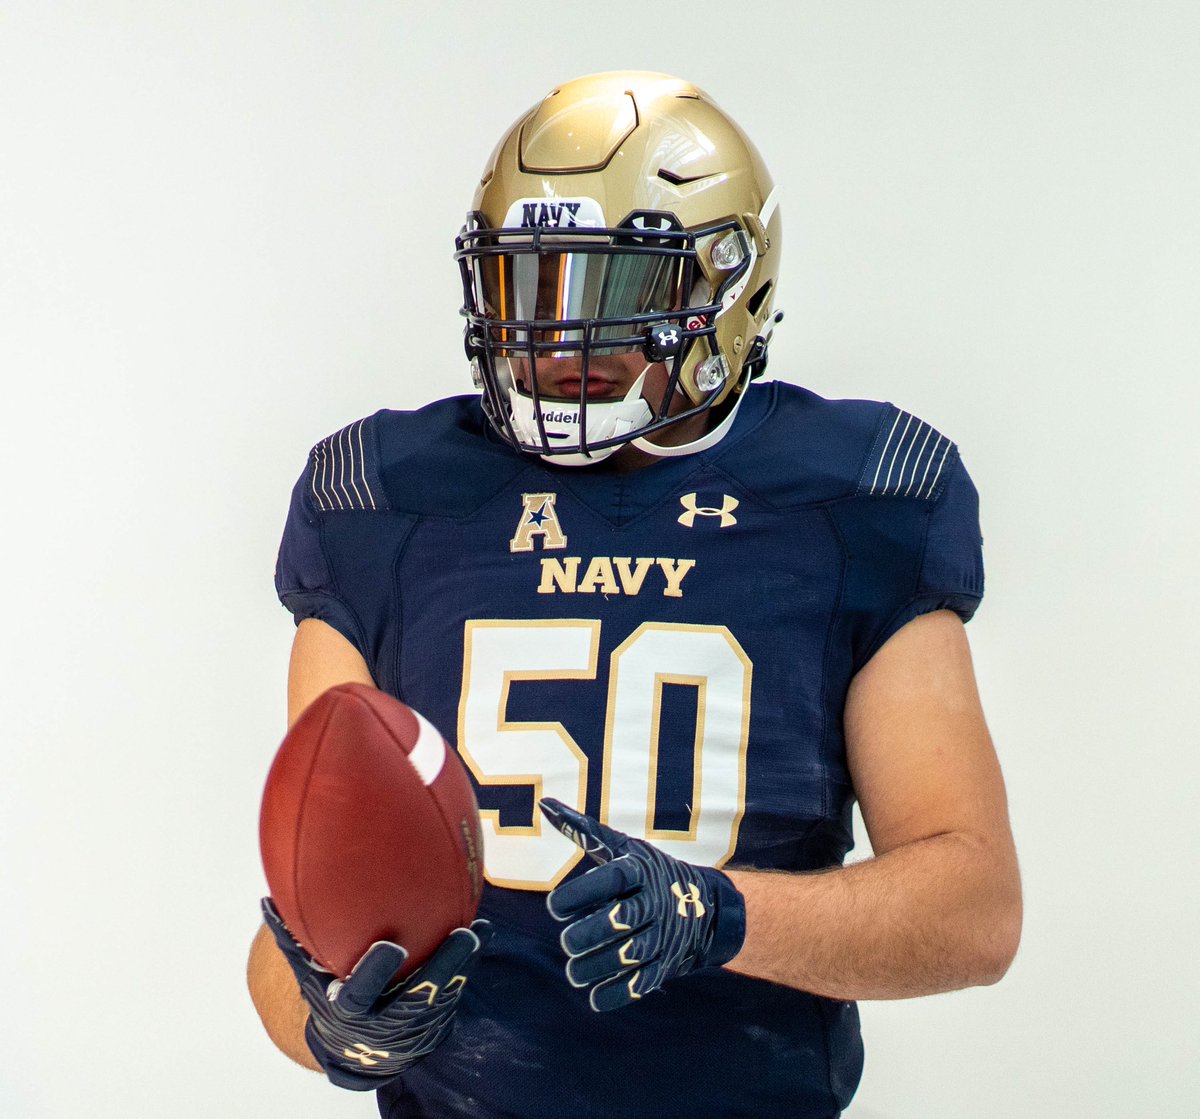 Had a great official visit at Navy! Thank you to @NavyCoachYo @CoachAIngram and the entire coaching staff for an amazing weekend. Cant wait to get to work, happy to call this place home!